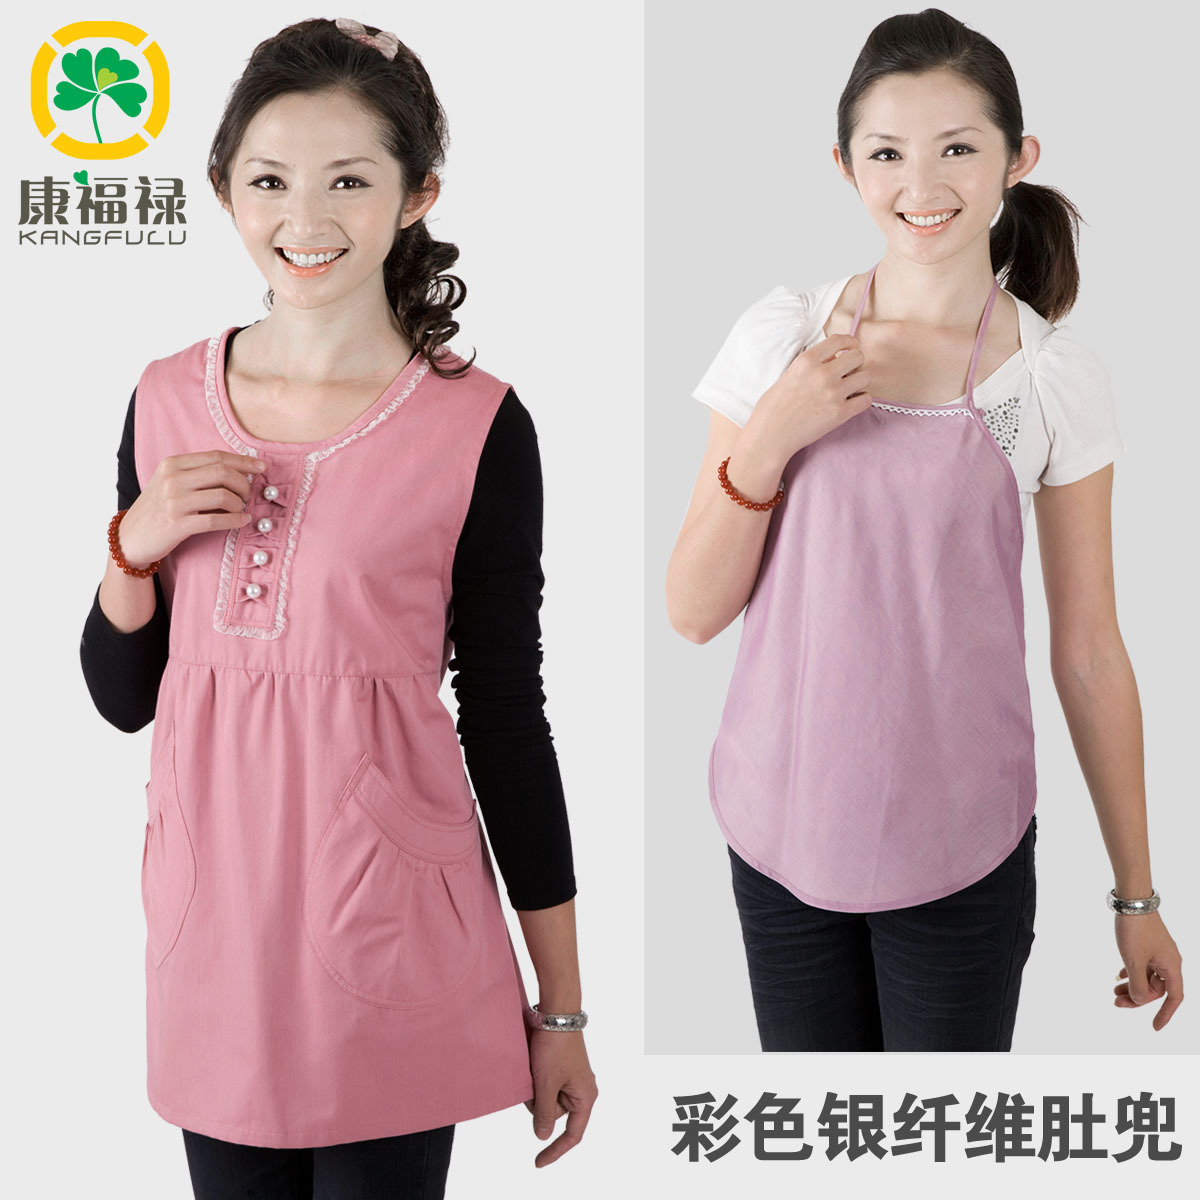 Radiation-resistant maternity clothing silver fiber radiation-resistant bellyached maternity radiation-resistant autumn and